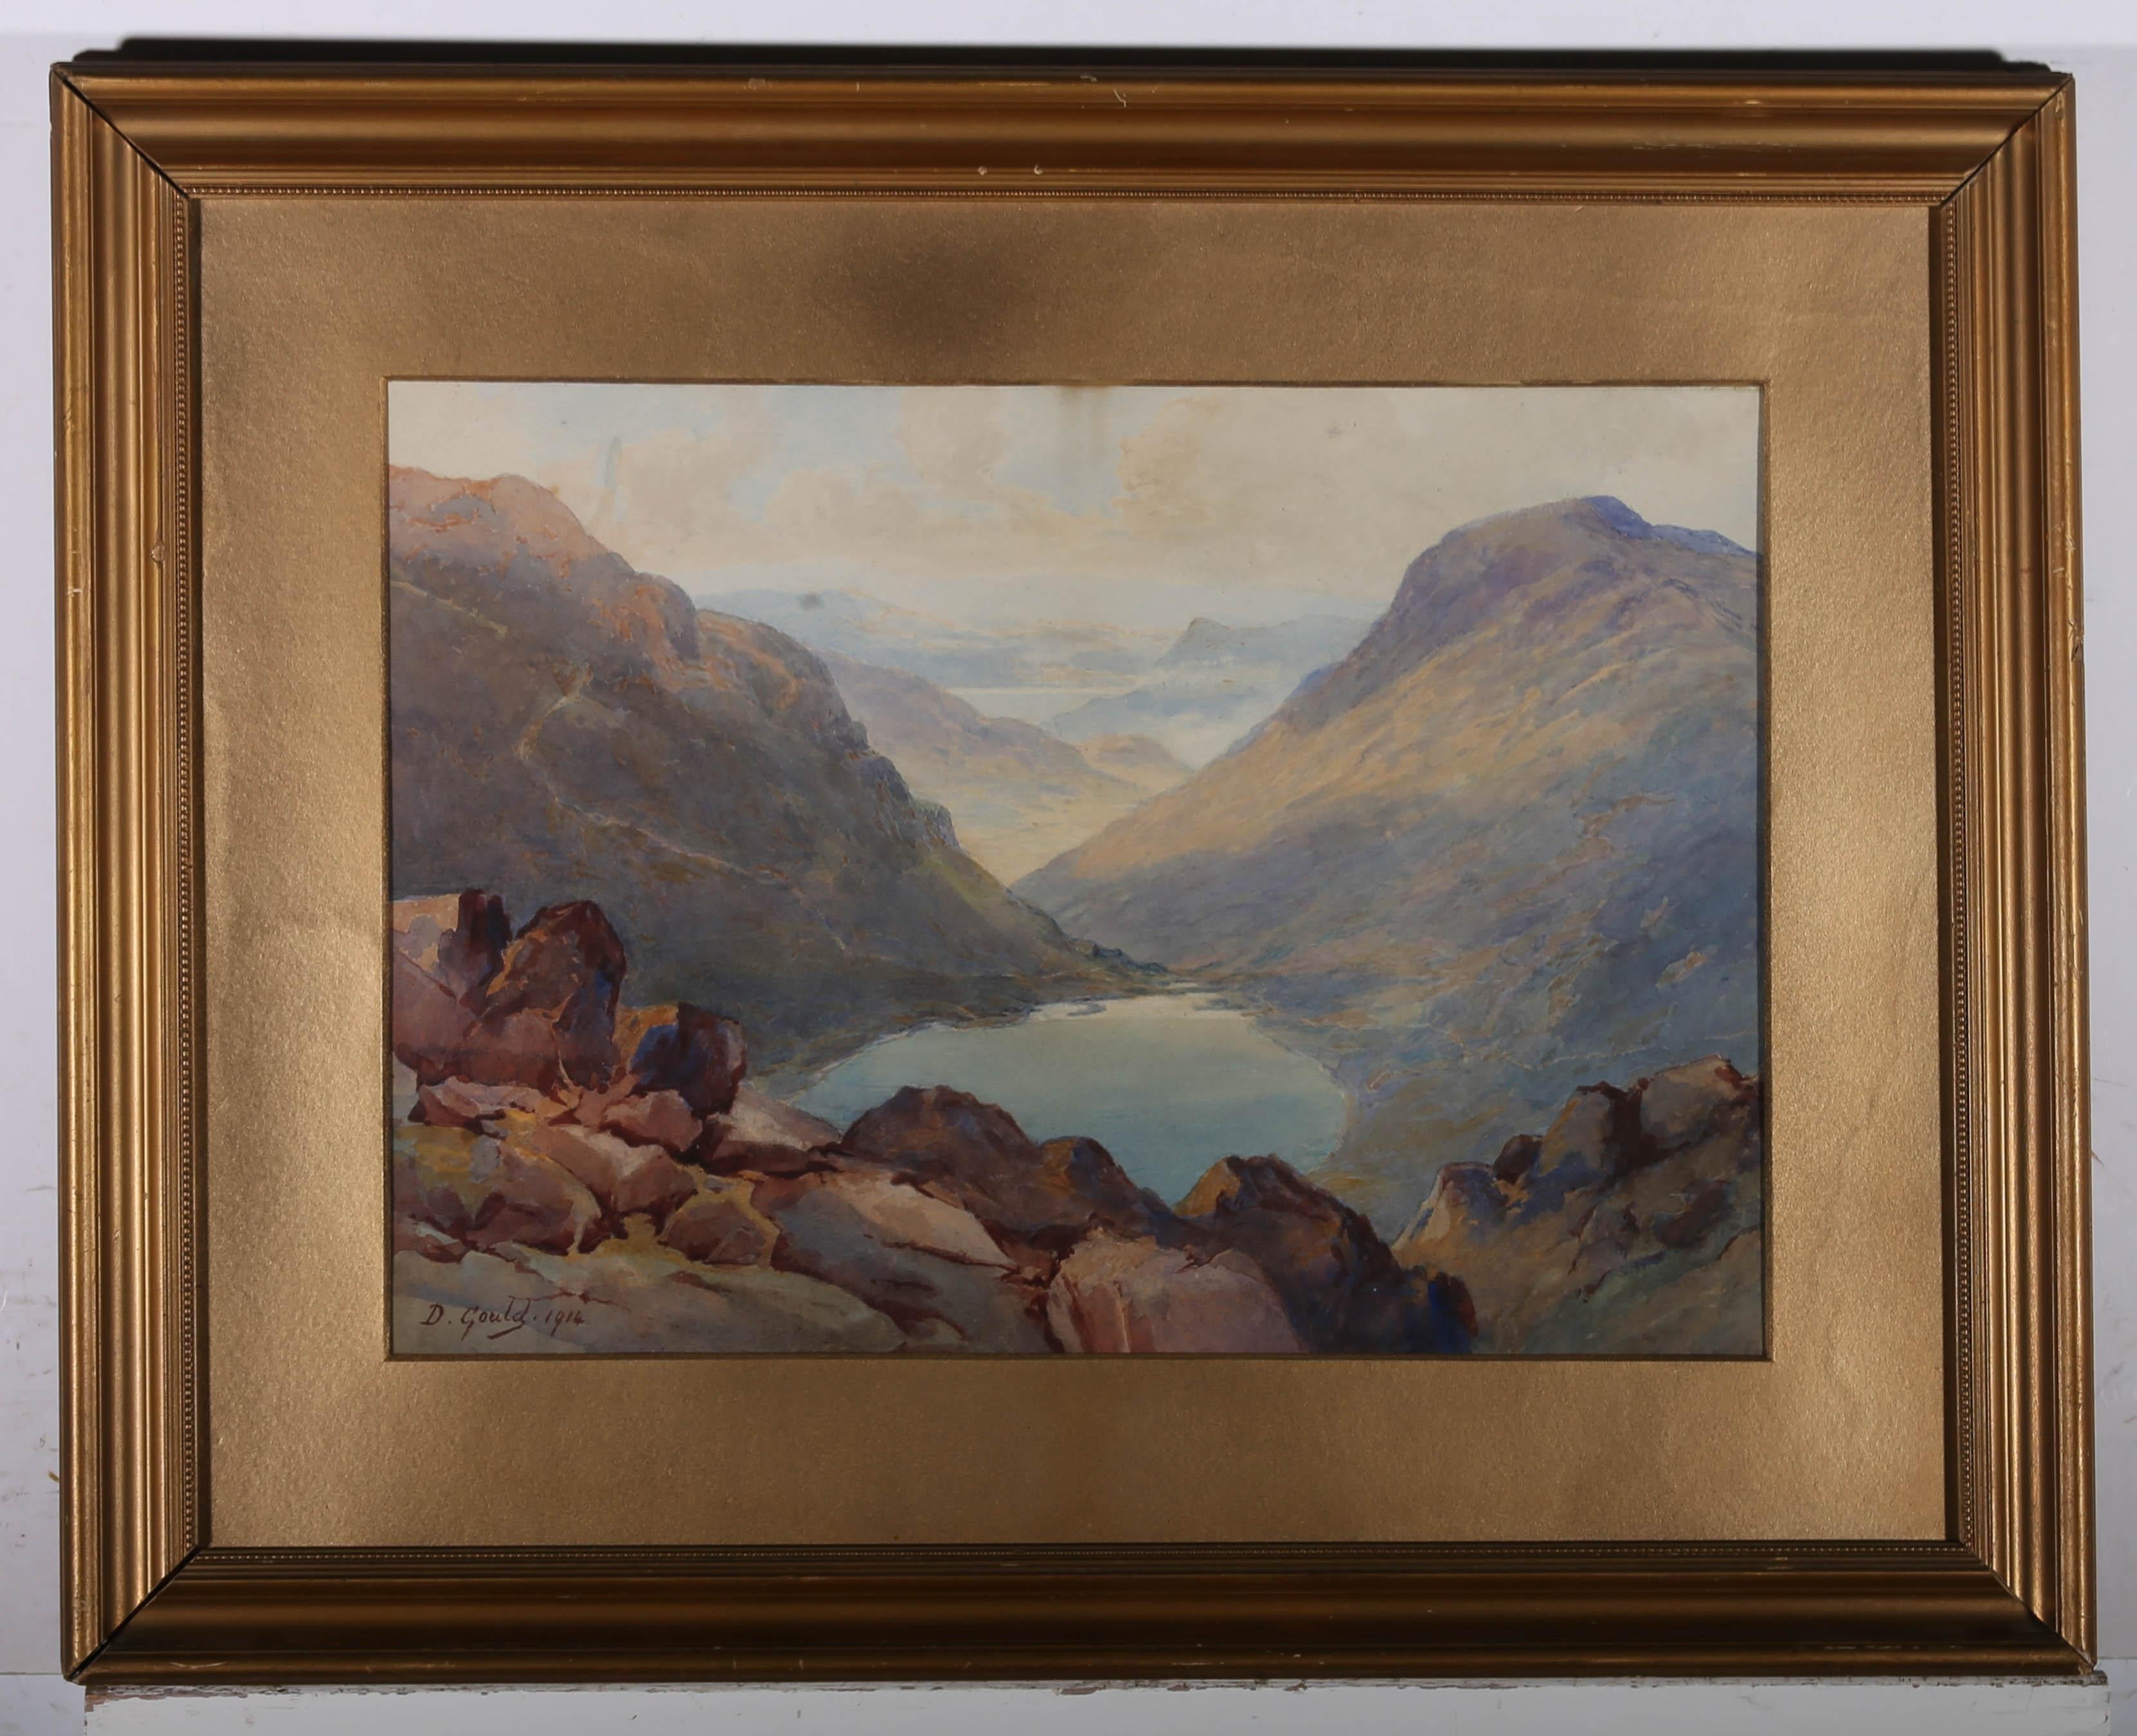 An atmospheric and striking early 20th century watercolour by landscape artist David Gould. This impressive view from Grisedale Pike, Cumbria depicts a secluded water hole enveloped by undulating mountains on either side. This scene is typical of